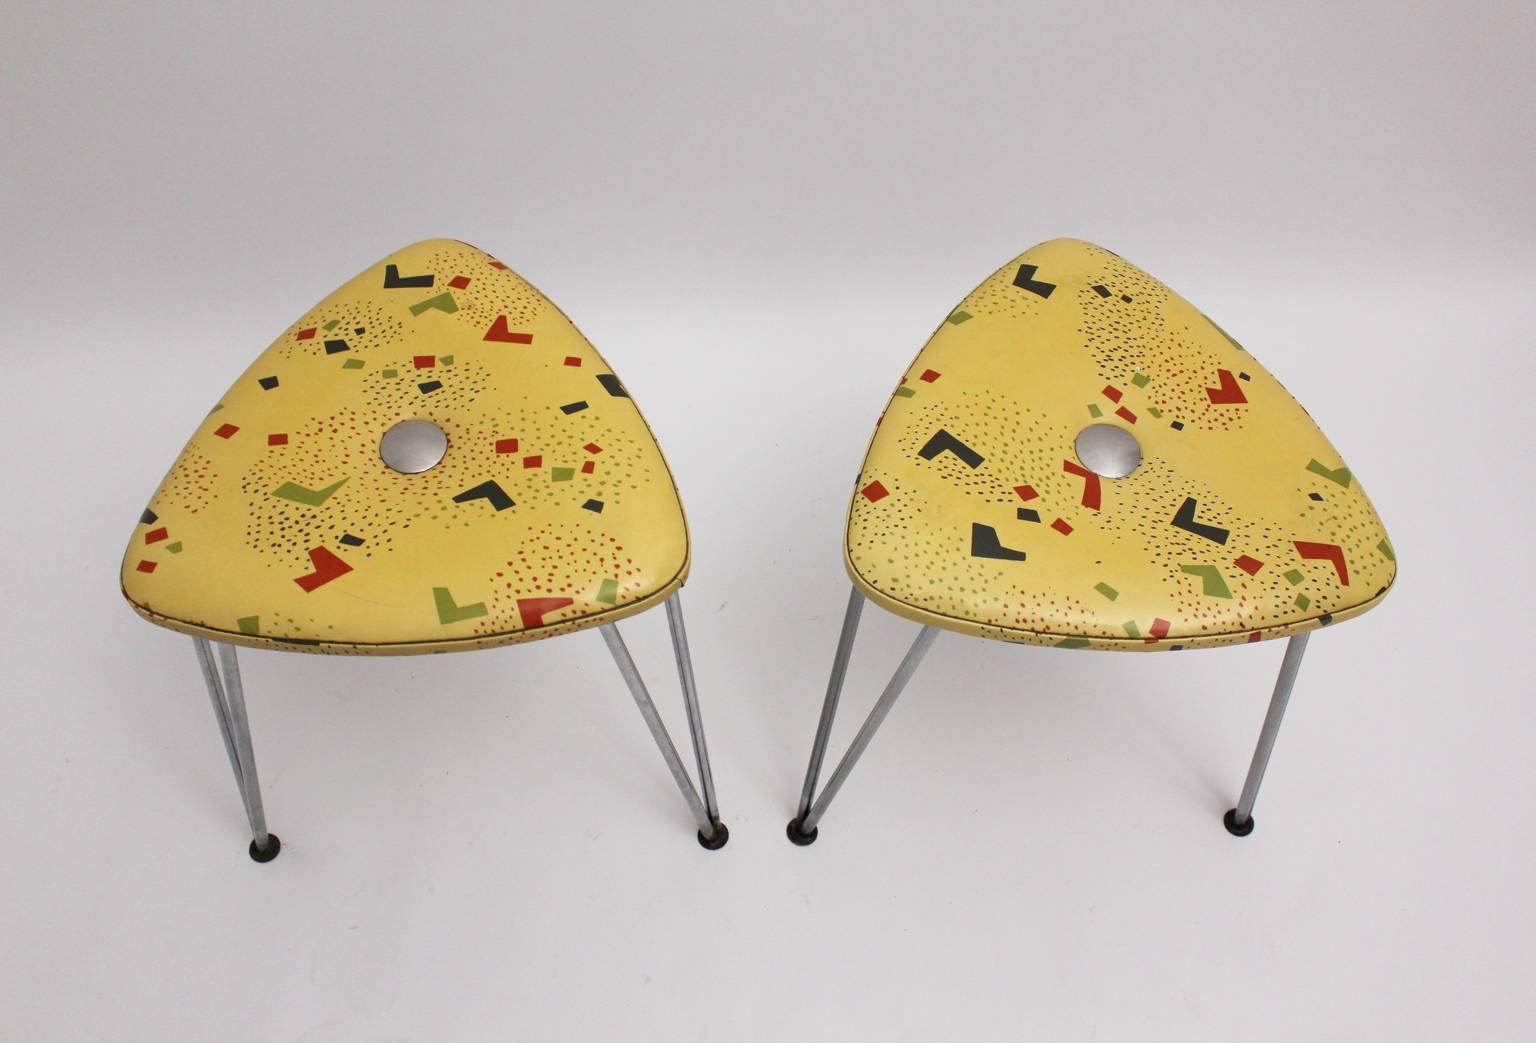 Mid-Century Modern Mid Century Modern Vintage Stools by Talos, 1950s, Vienna Set of Two For Sale